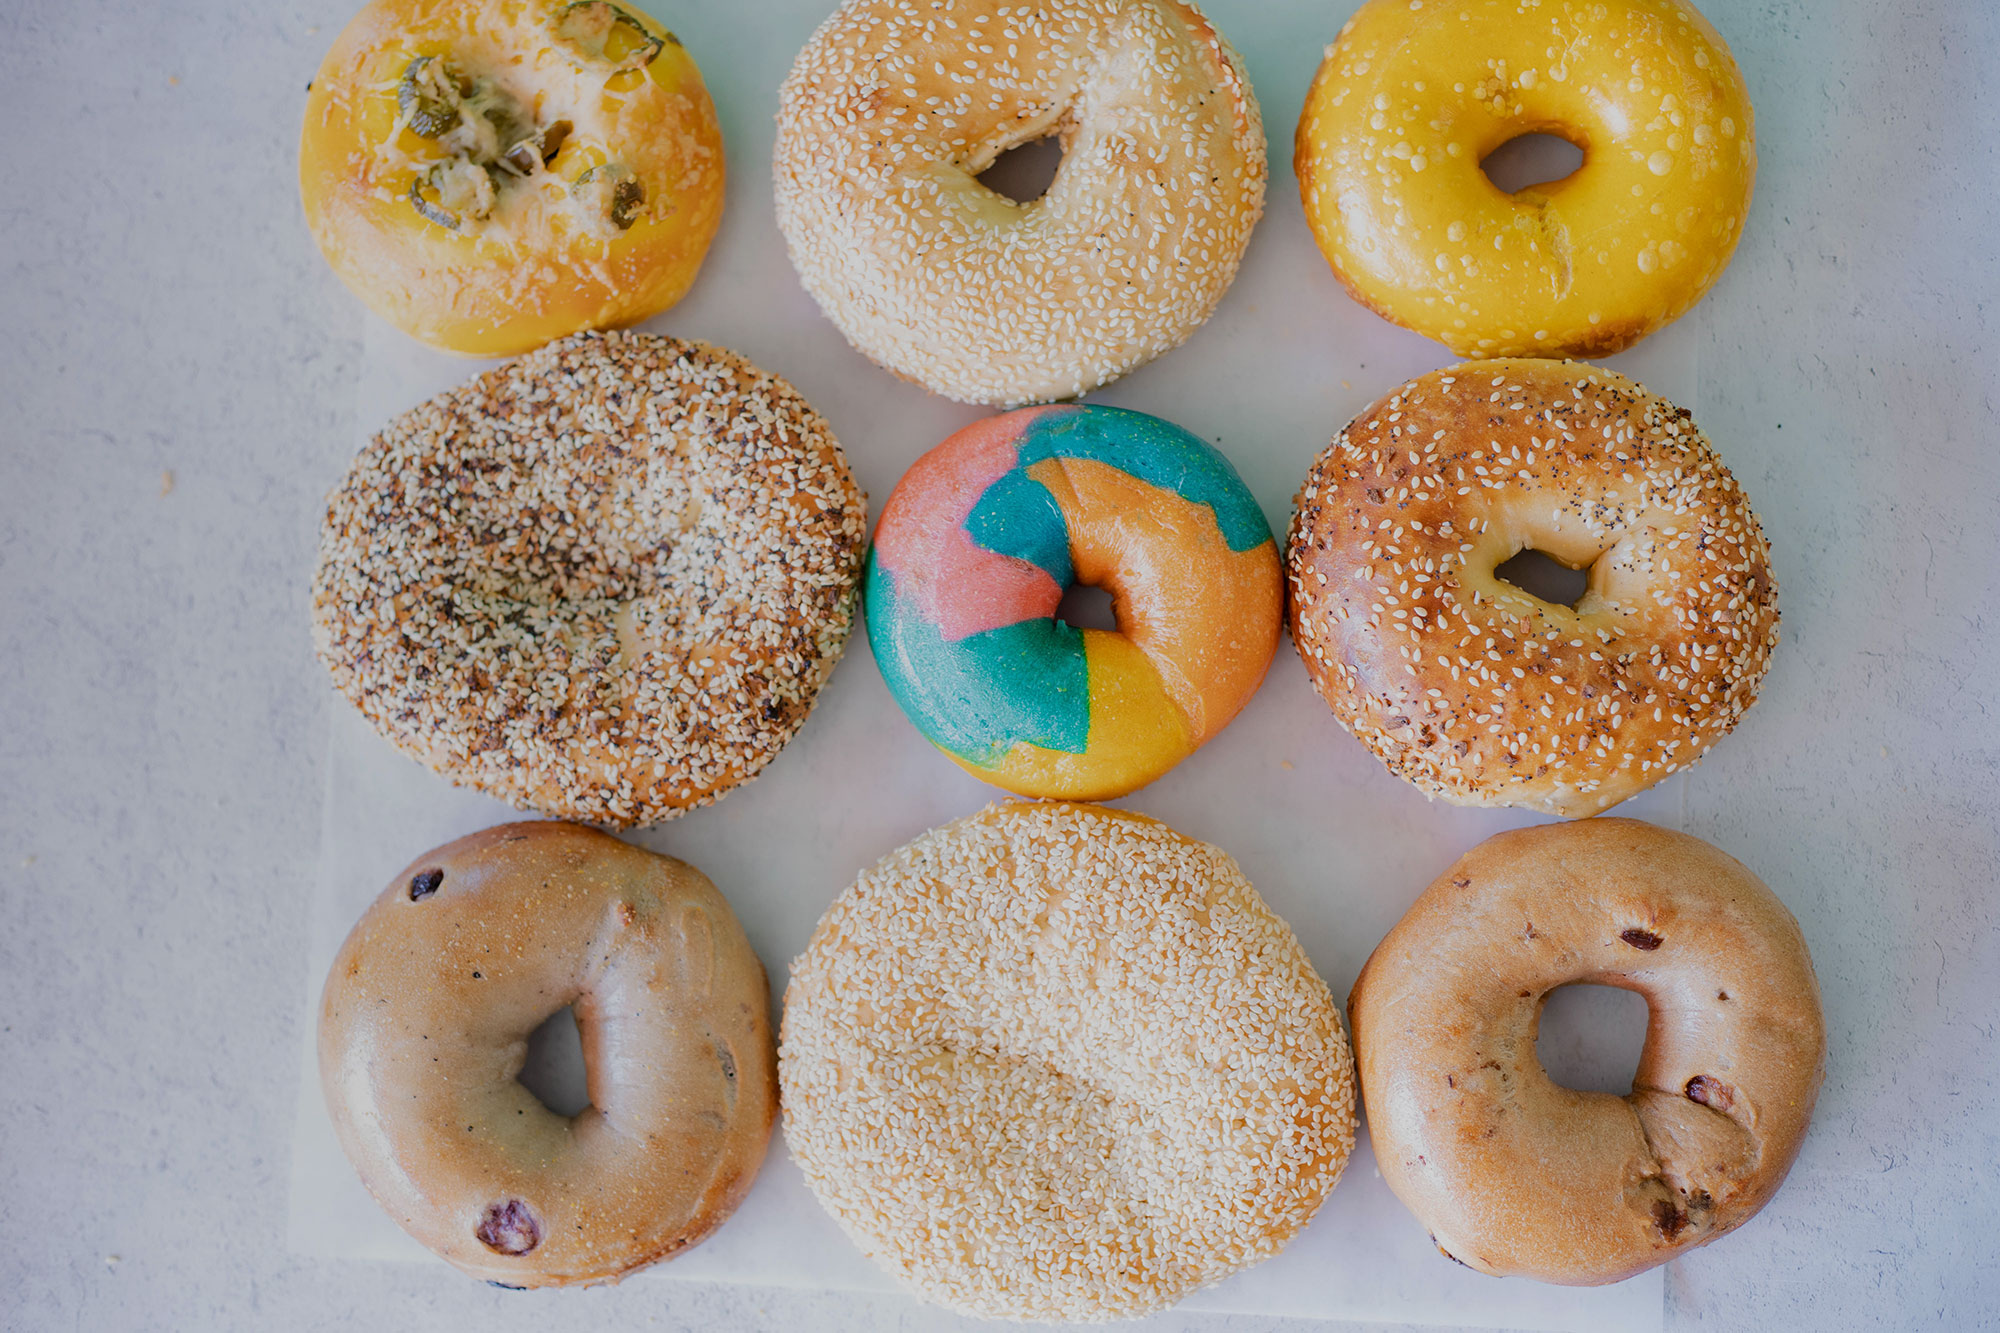 a selection of delicious bagels at beverly hills bagel